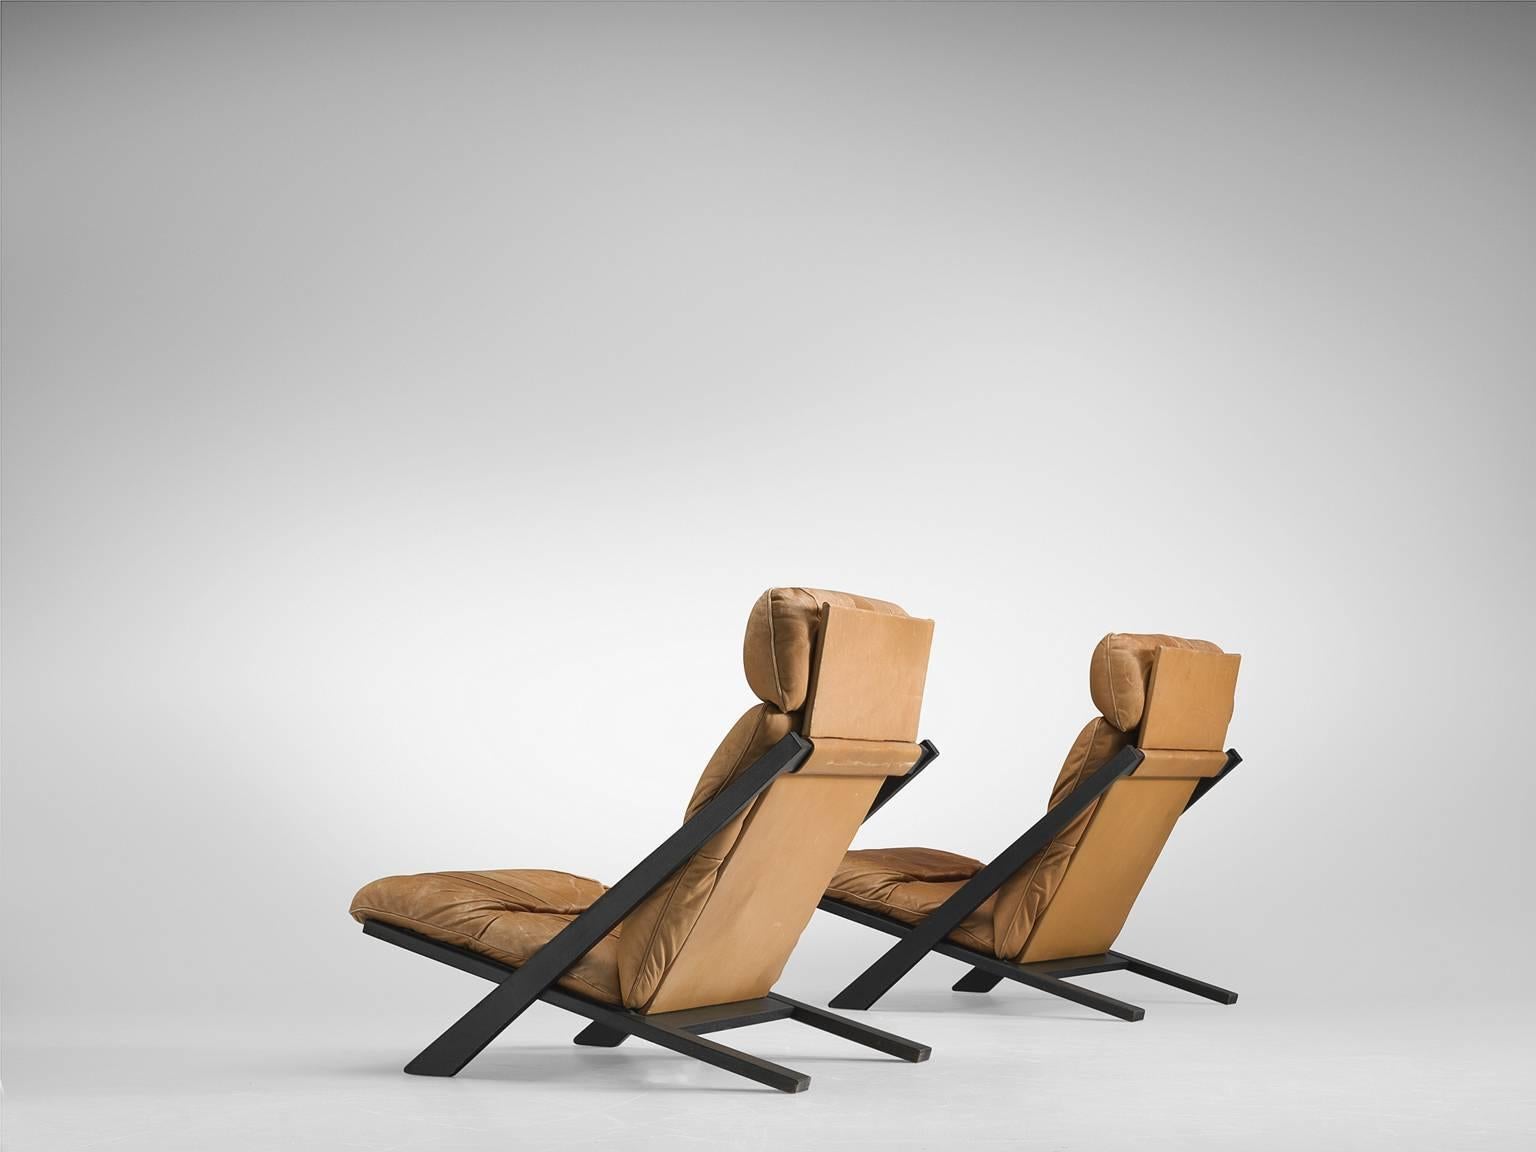 Pair of Cognac Leather Ueli Berger Lounge Chairs for De Sede (Postmoderne)